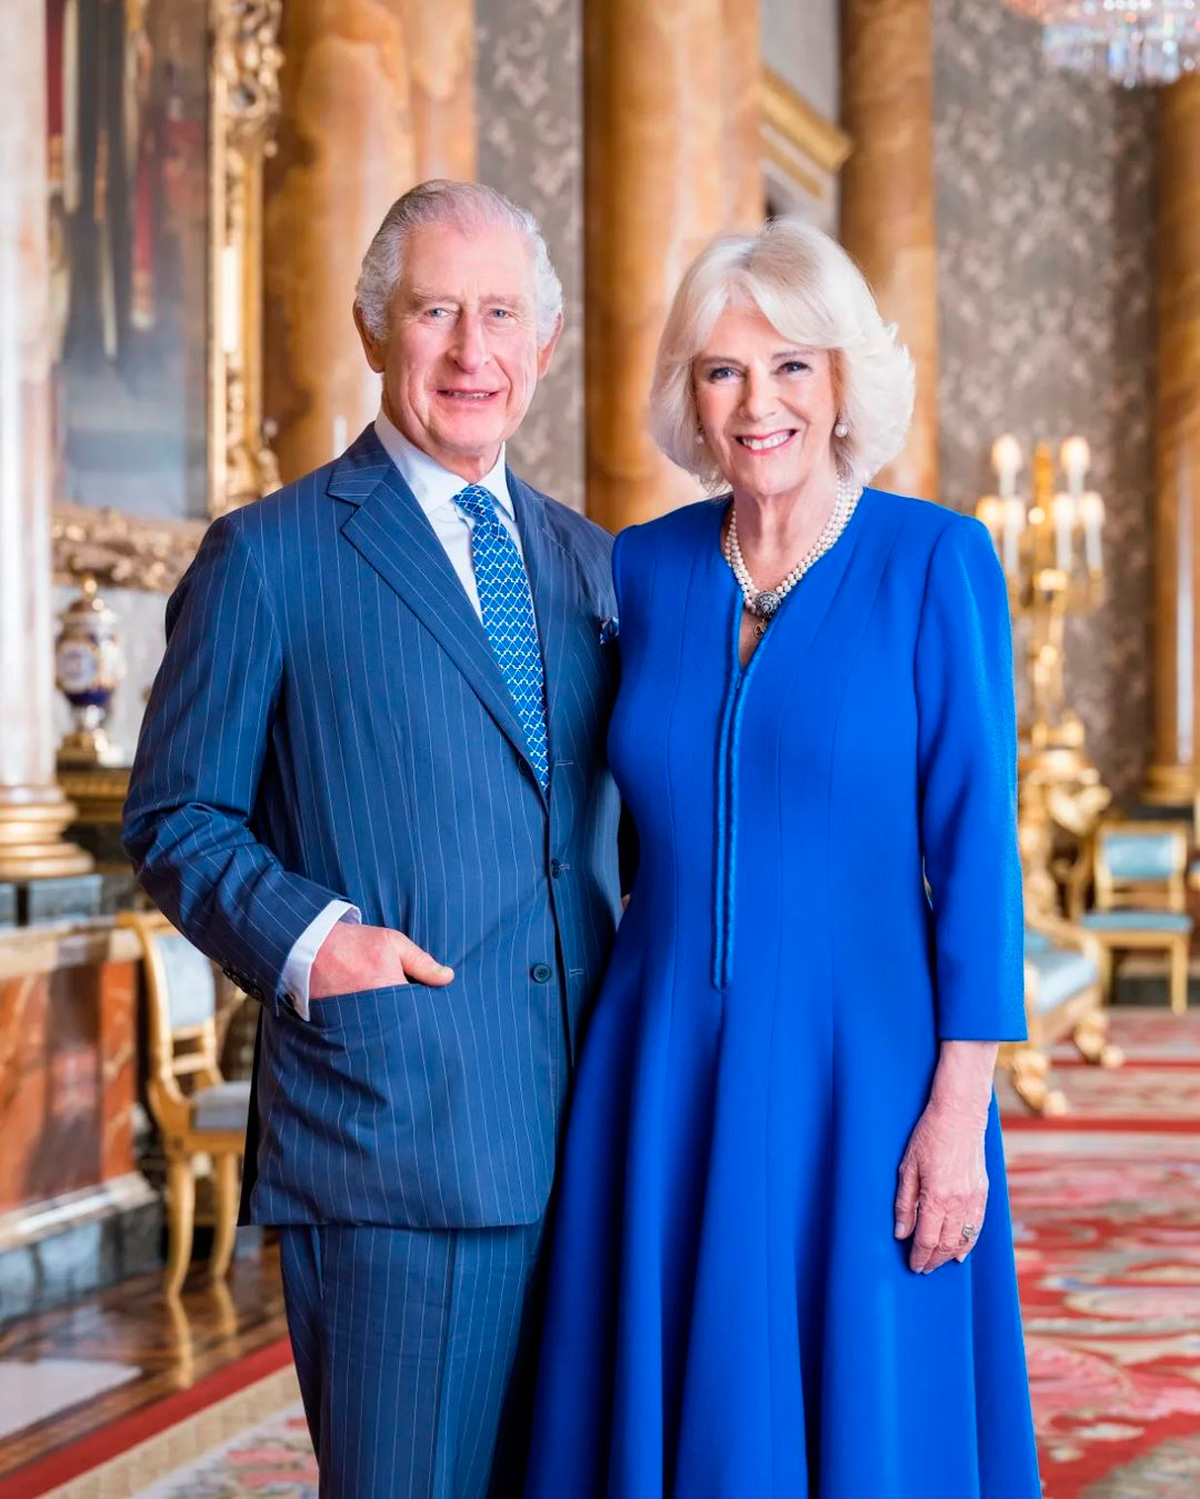 New photograph of The King Charles and Queen Camilla